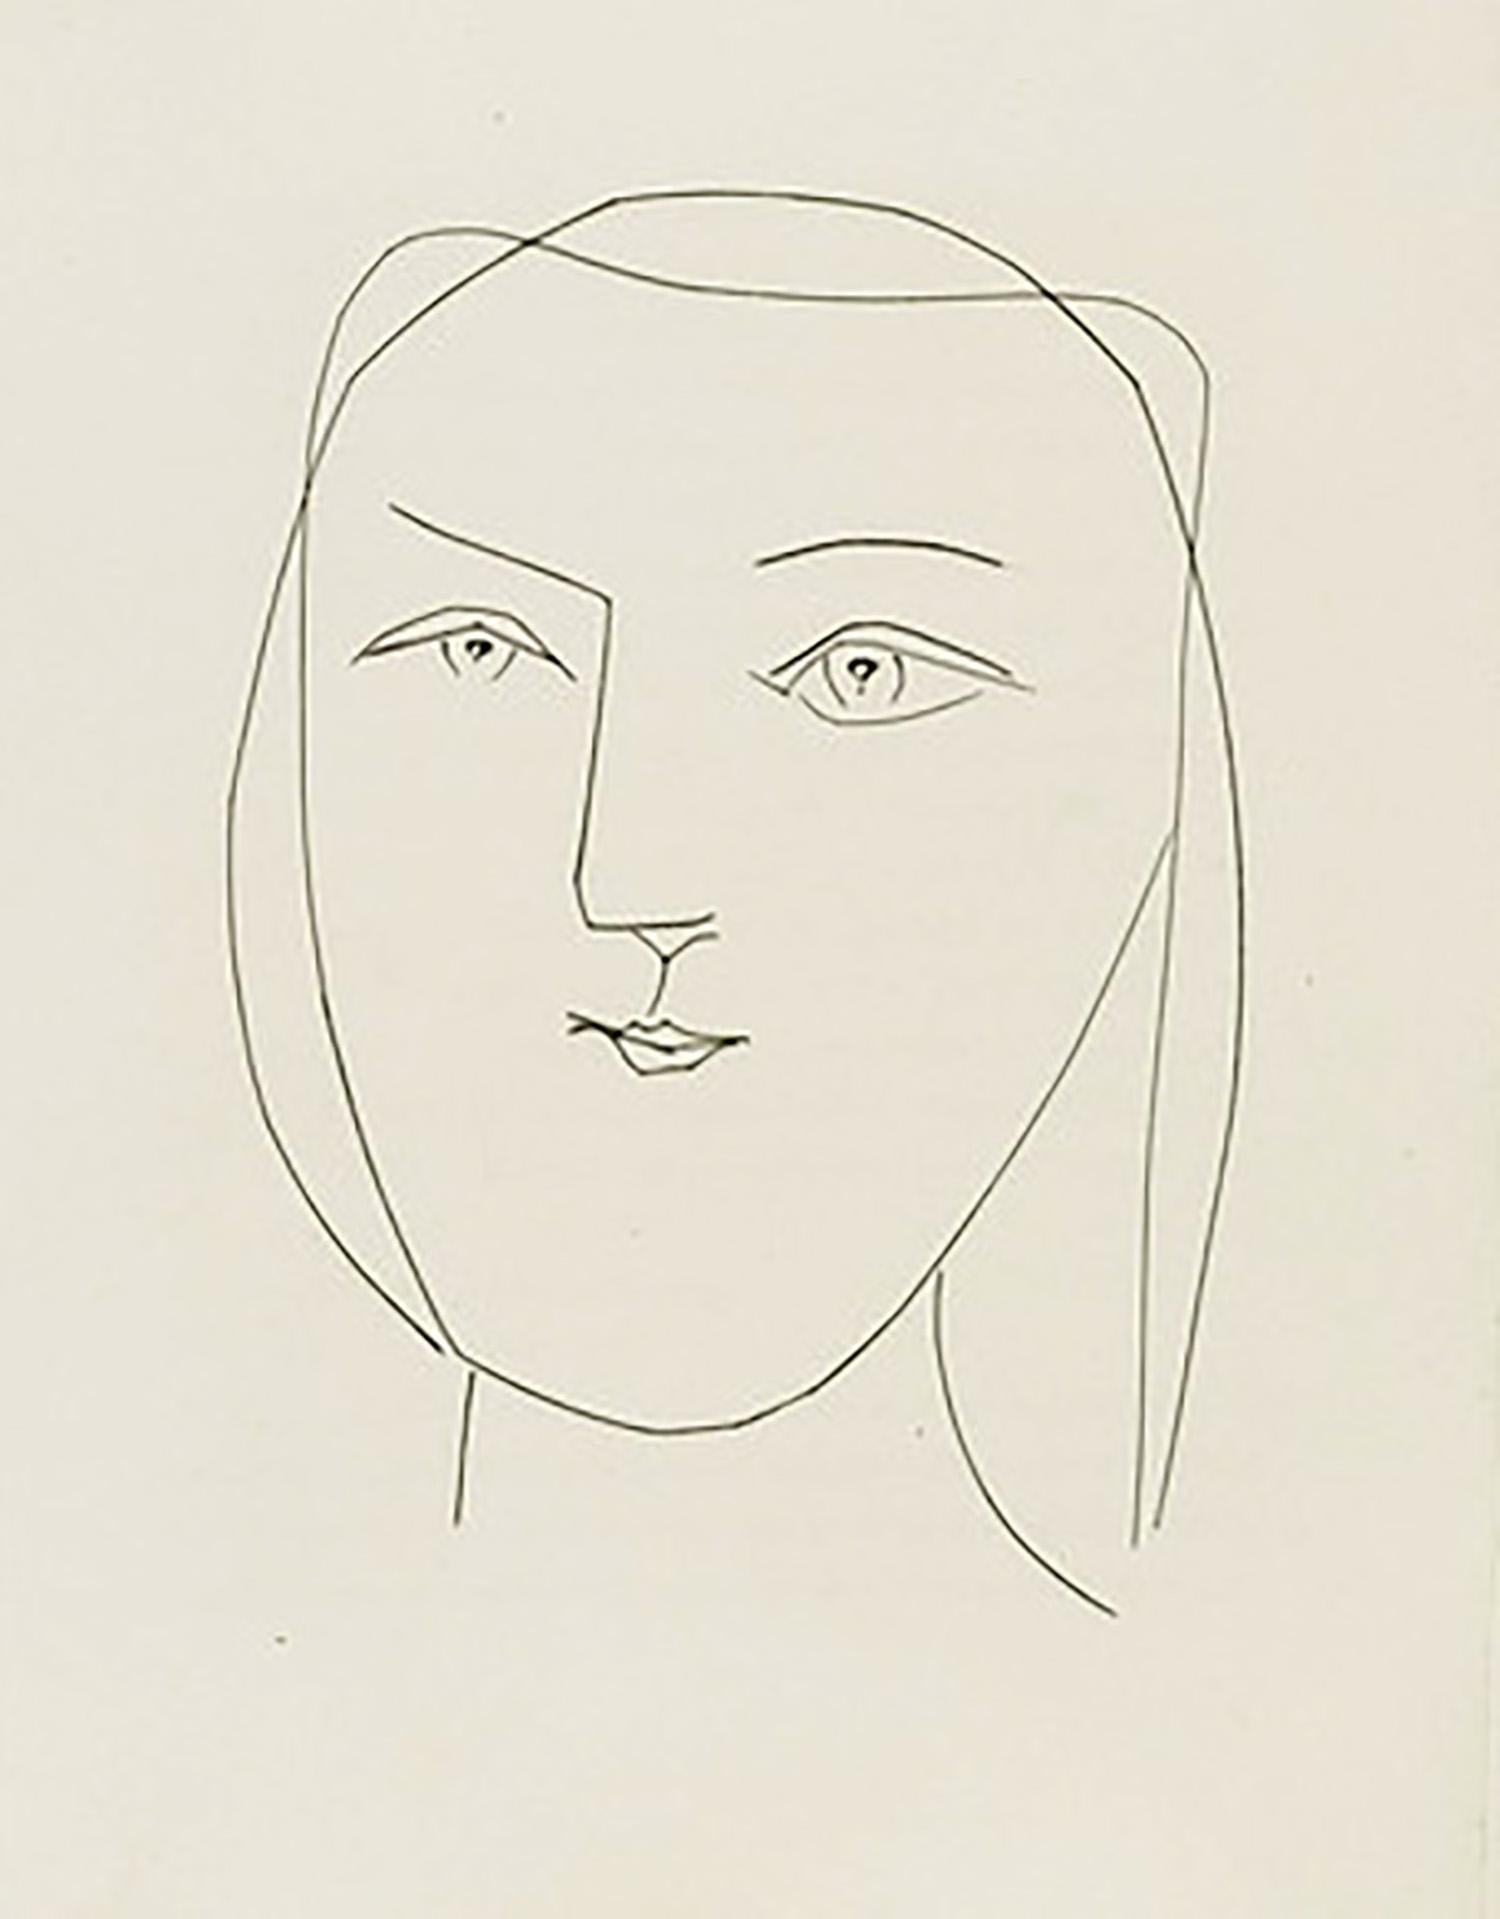 Pablo Picasso Portrait Print - Oval Head of a Woman with Piercing Eyes (Plate XXI)